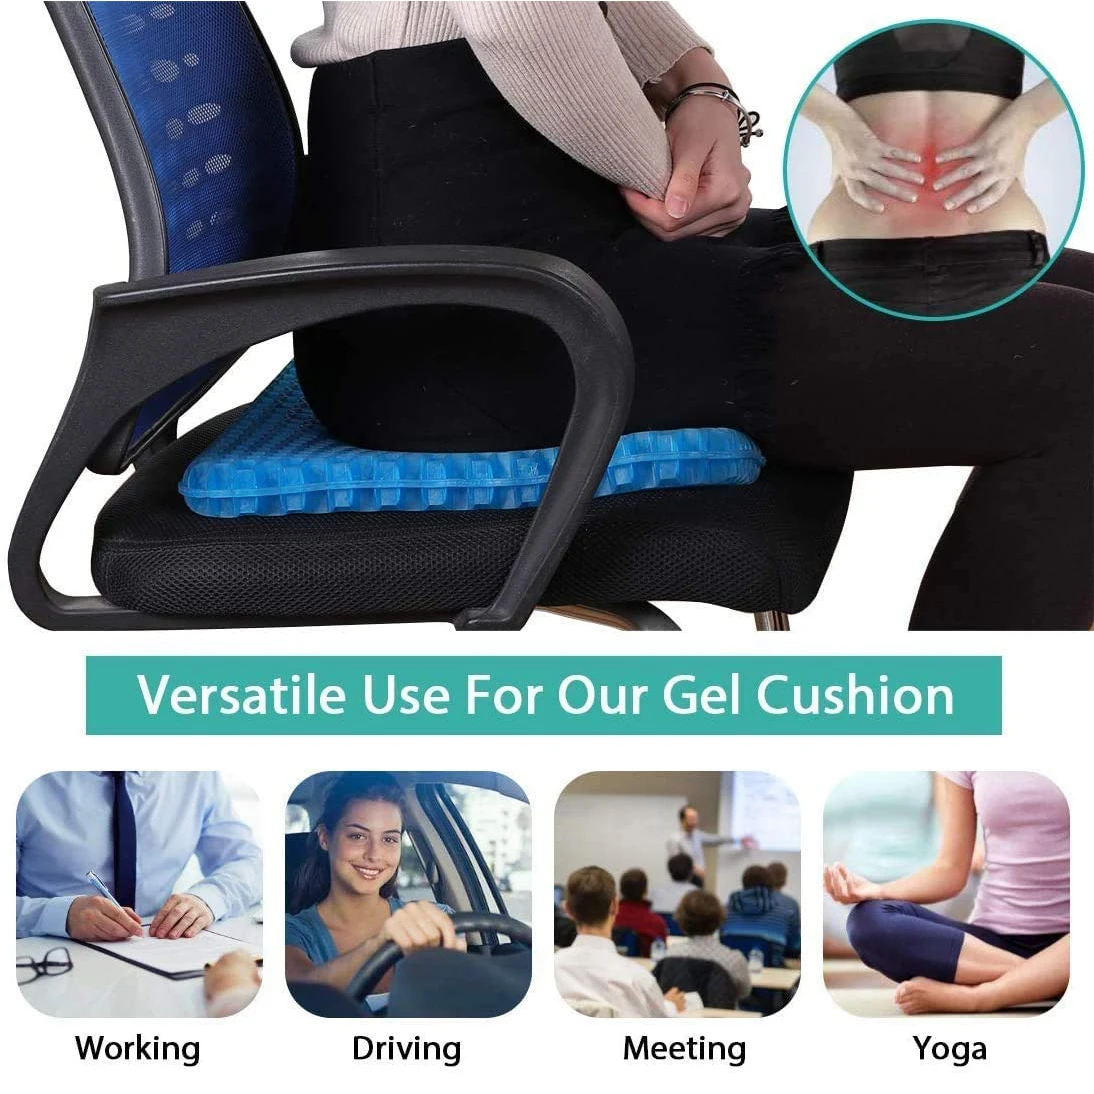 https://ae01.alicdn.com/kf/S74e9cb6f5e0147668c2c731686866c44B/Gel-Seat-Thick-Large-Cushion-Honeycomb-Design-Non-Slip-Pressure-Relief-Back-Tailbone-Pain-Home-Office.jpg